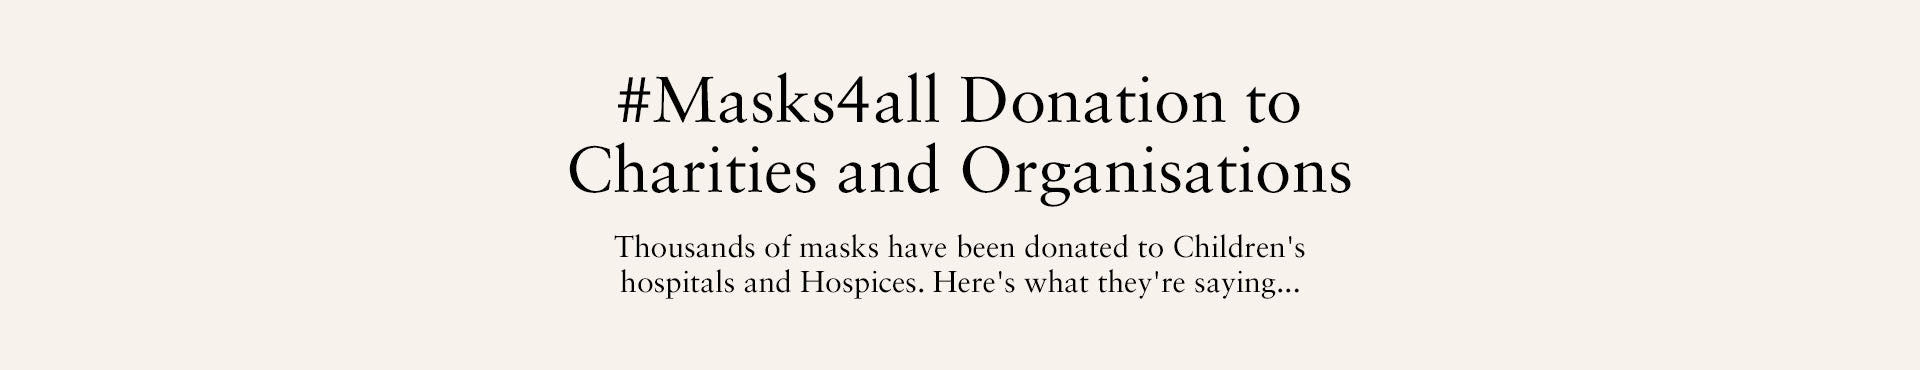 #Masks4all Donation to Charities and Organisations